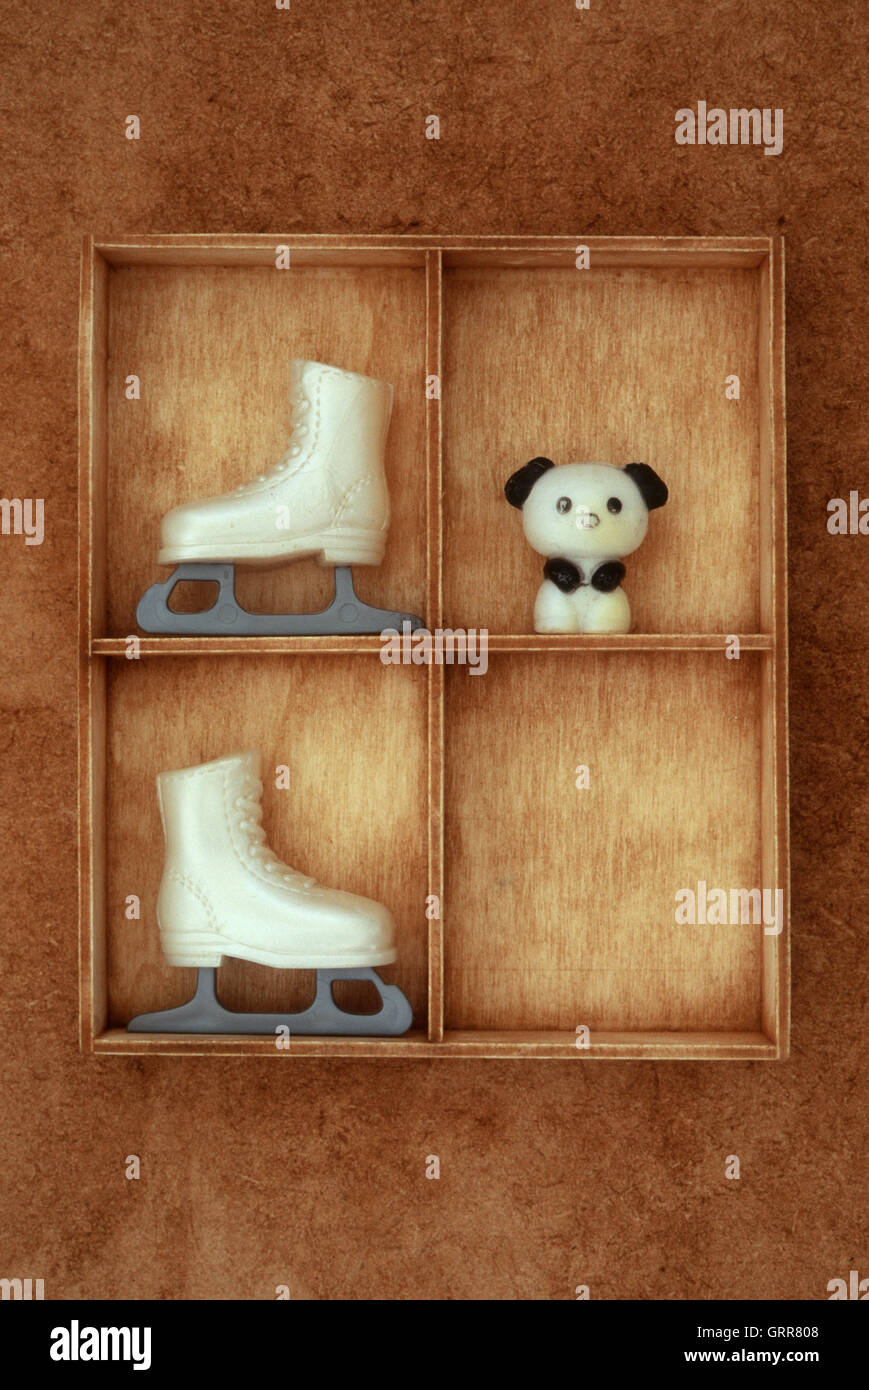 Small wooden compartments containing vintage plastic models of panda and doll ice-skating boots Stock Photo